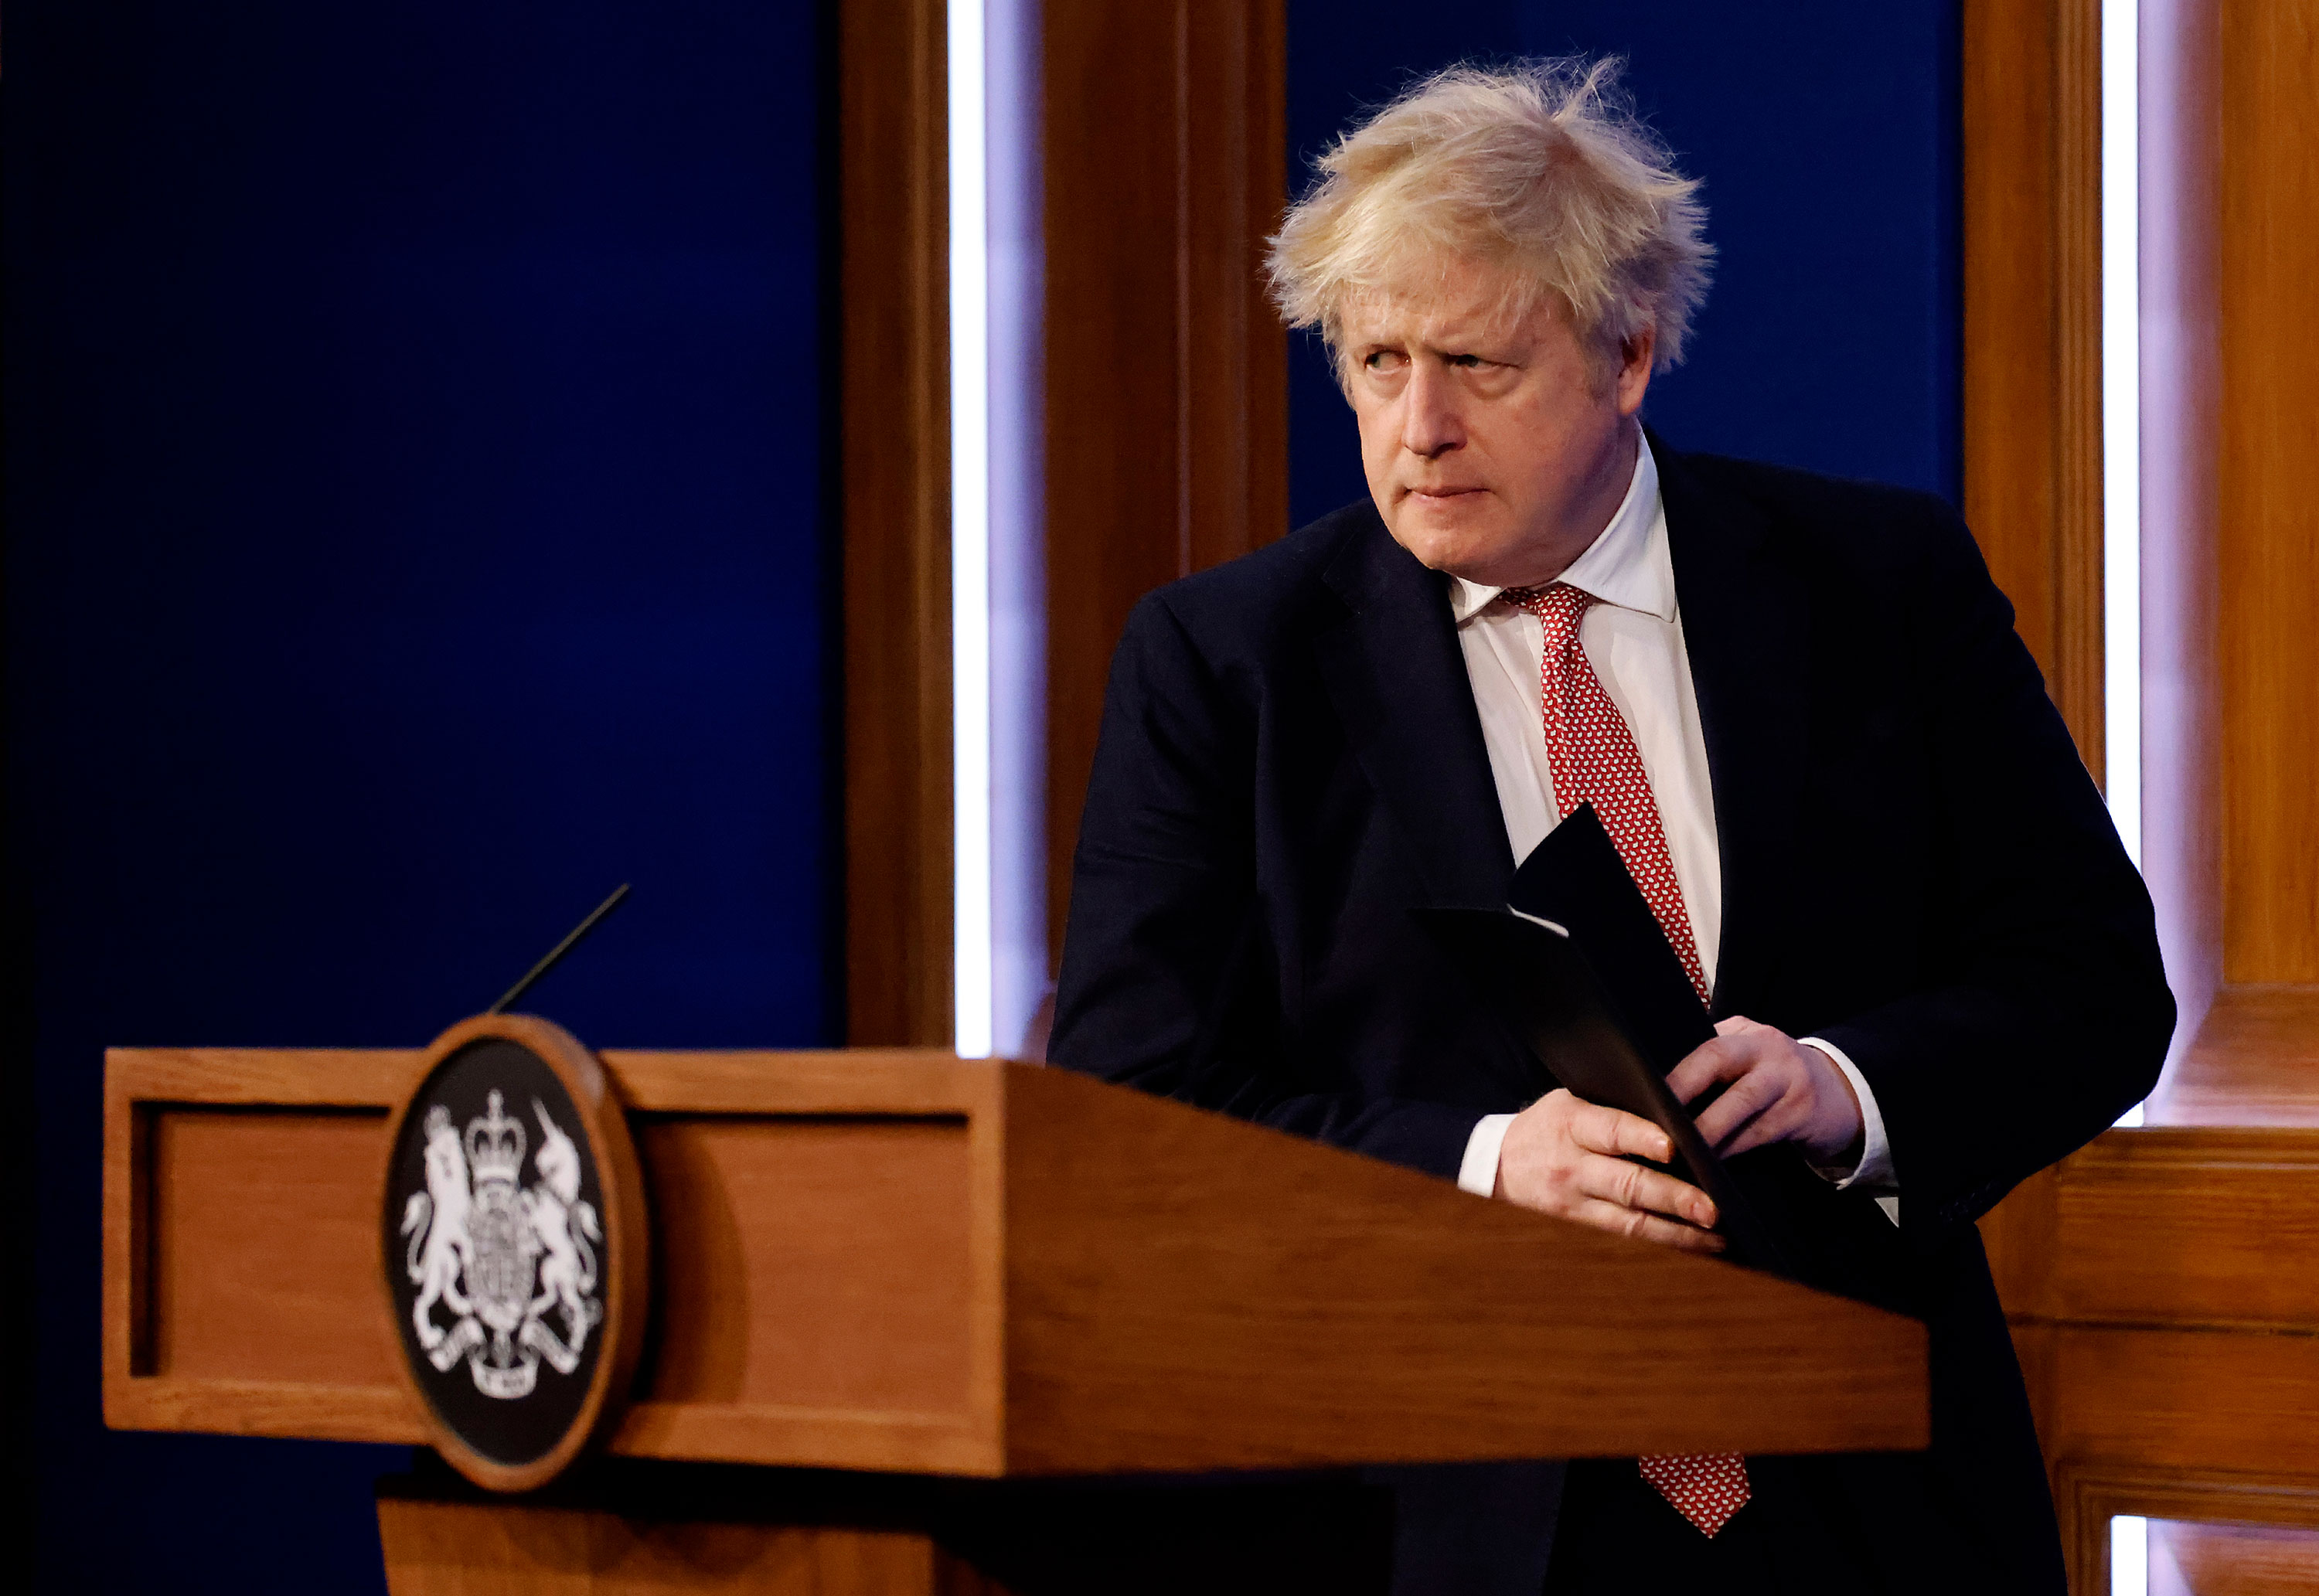 British Prime Minister Boris Johnson is seen during an address to the nation in February 21 in London.